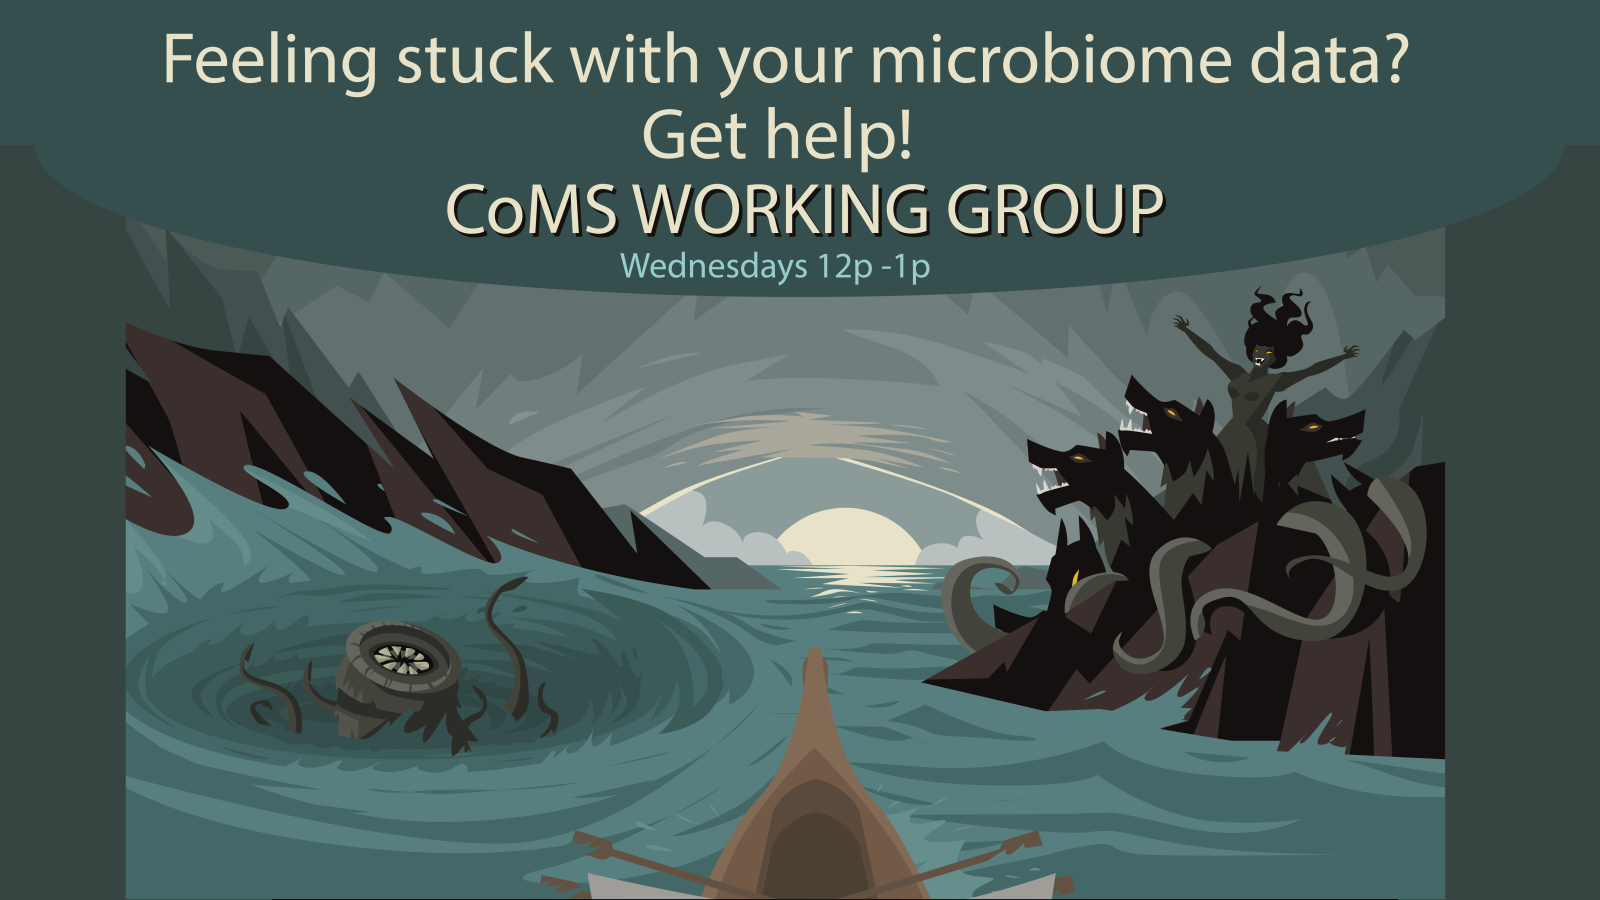 CoMS Working Group Wednesdays 12-1 pm